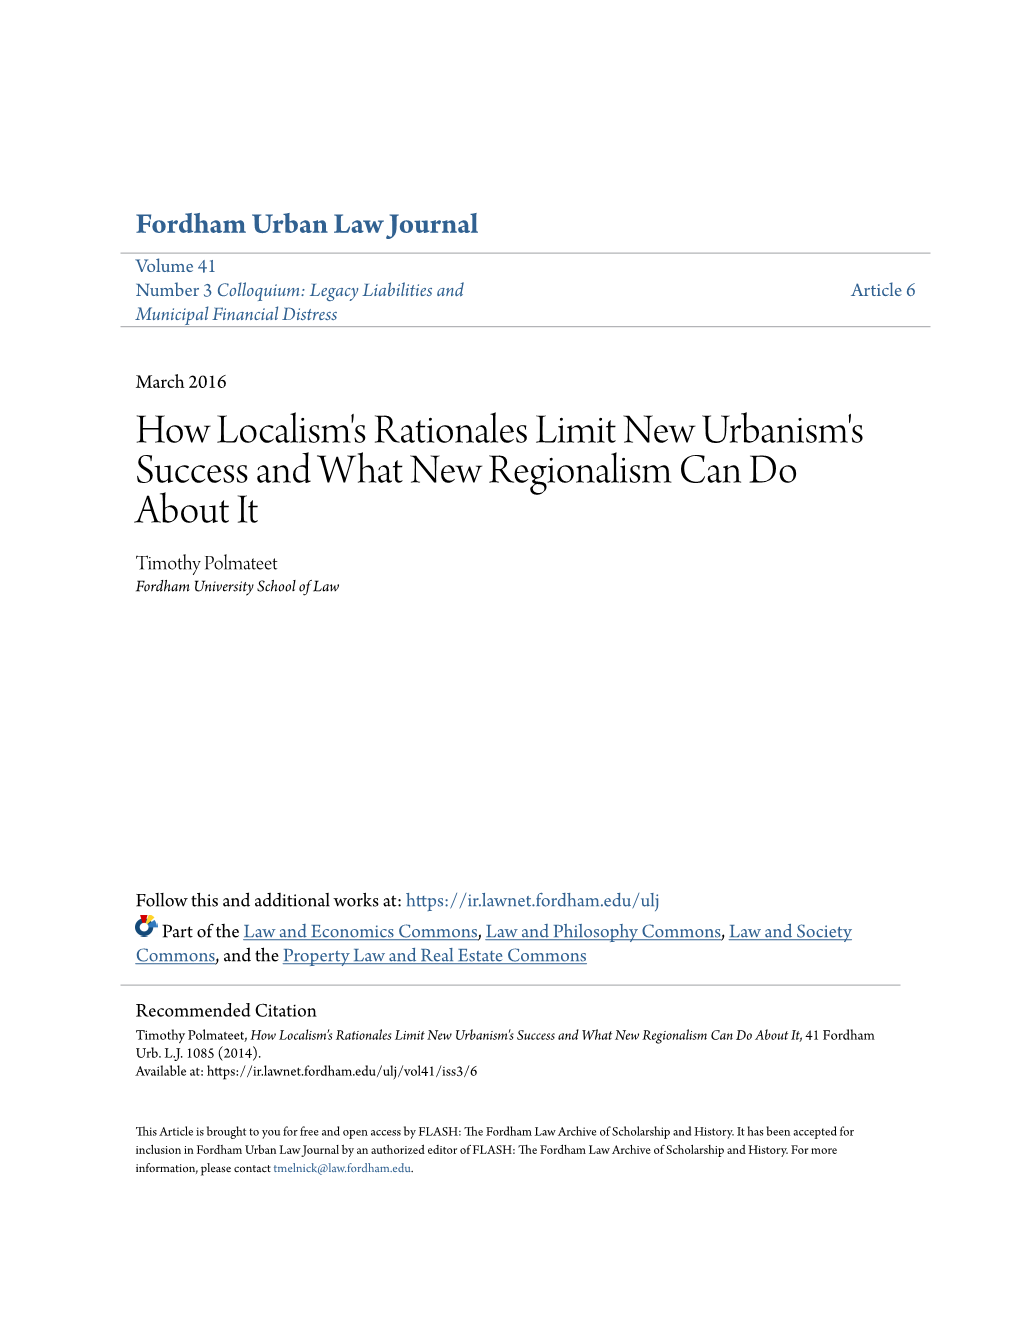 How Localism's Rationales Limit New Urbanism's Success and What New Regionalism Can Do About It Timothy Polmateet Fordham University School of Law